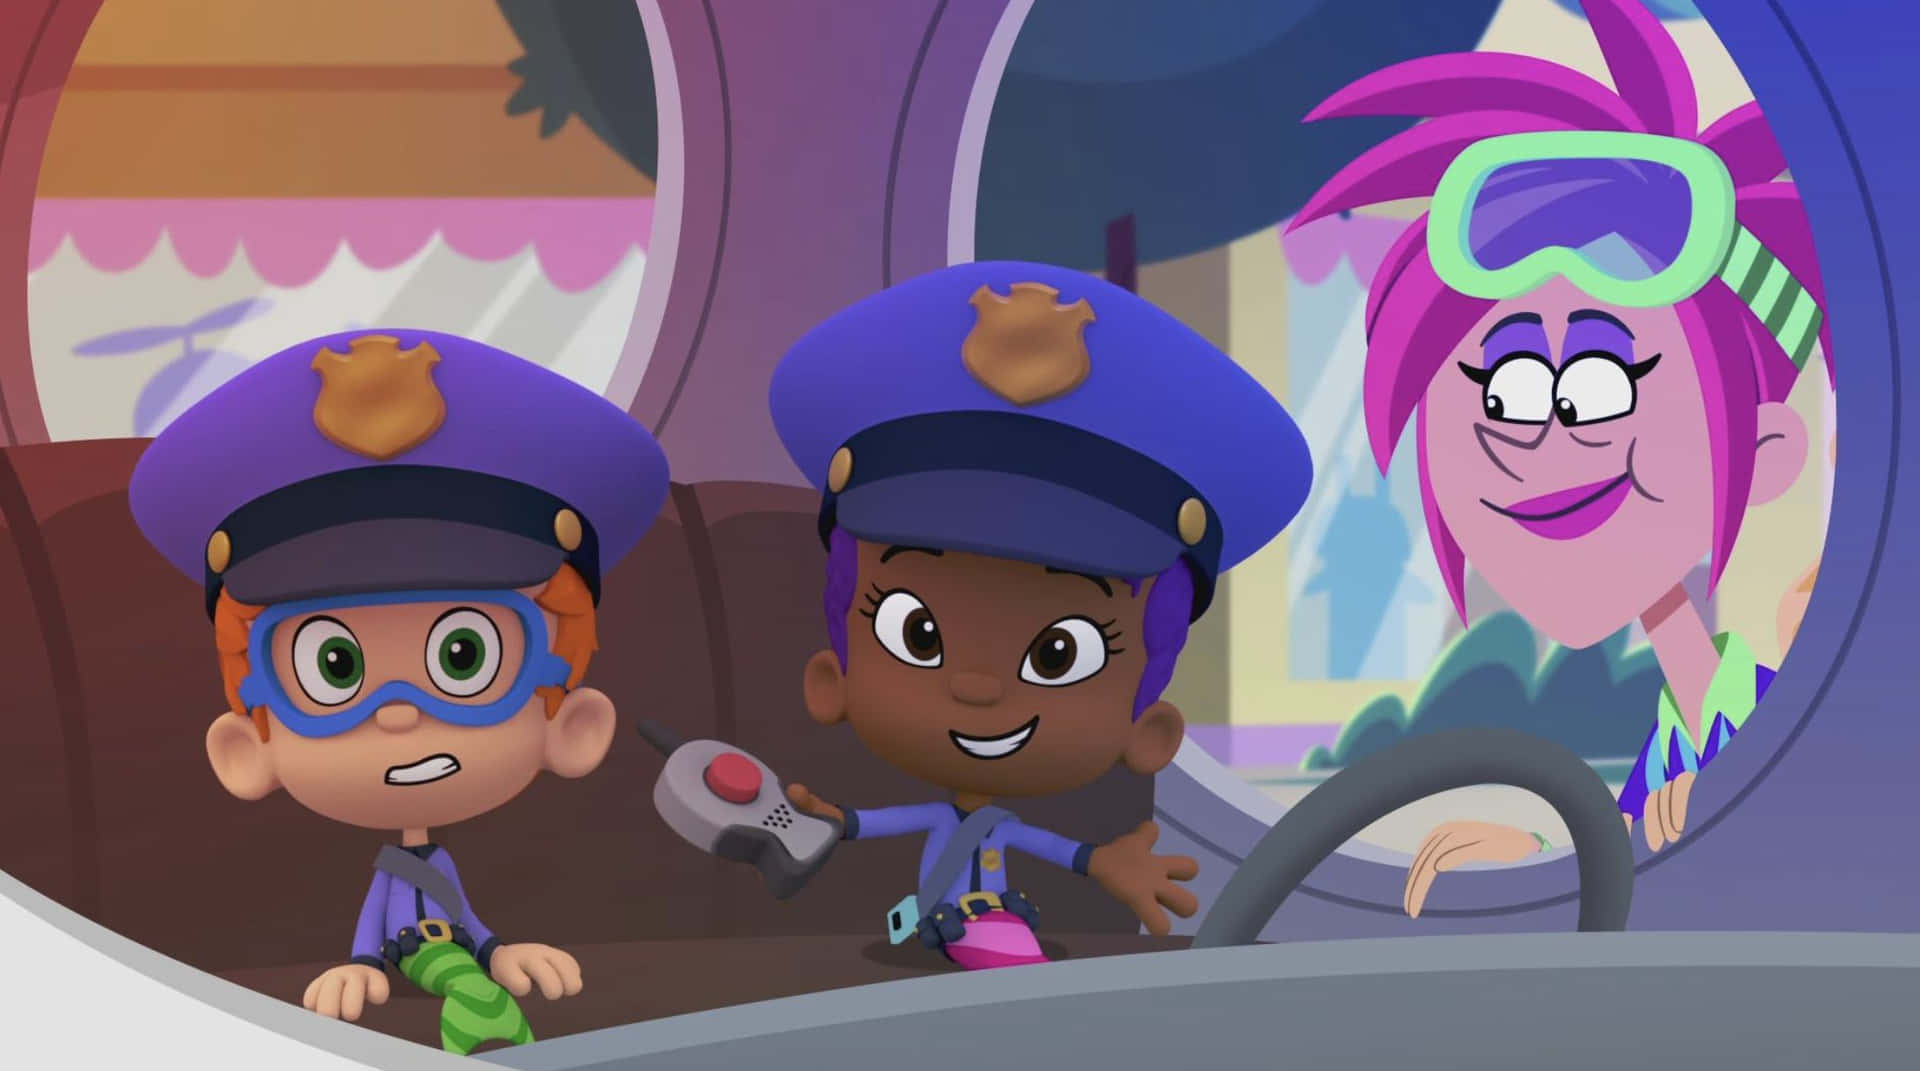 Bubble Guppies - Ready for Another Big Adventure